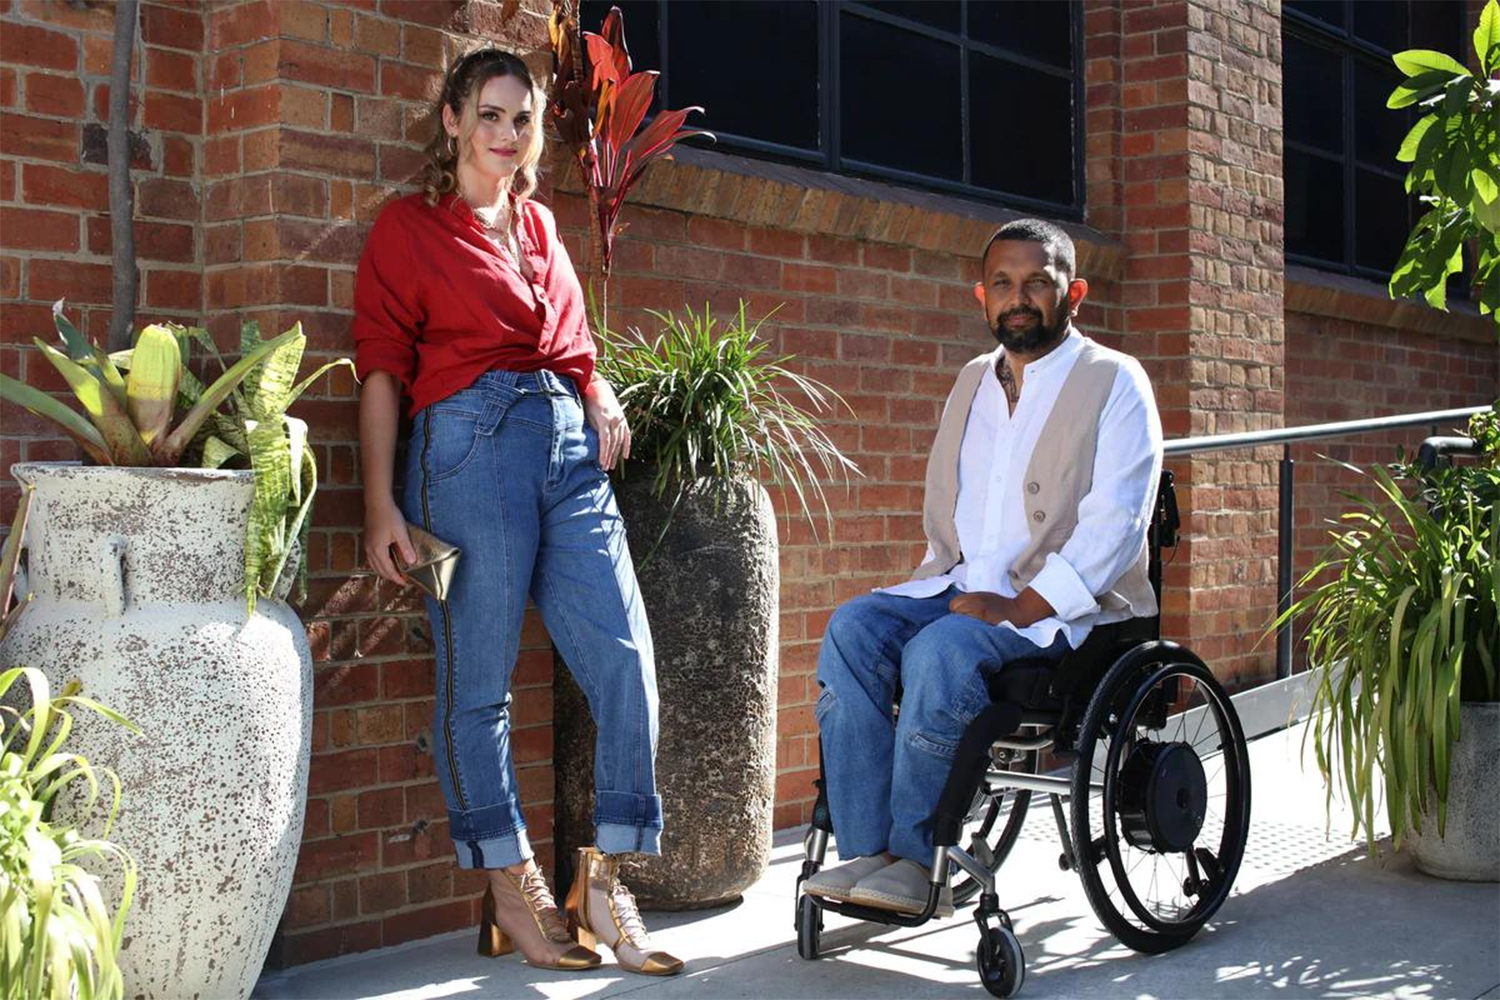 woman in red shirt standing next to man in wheel chair